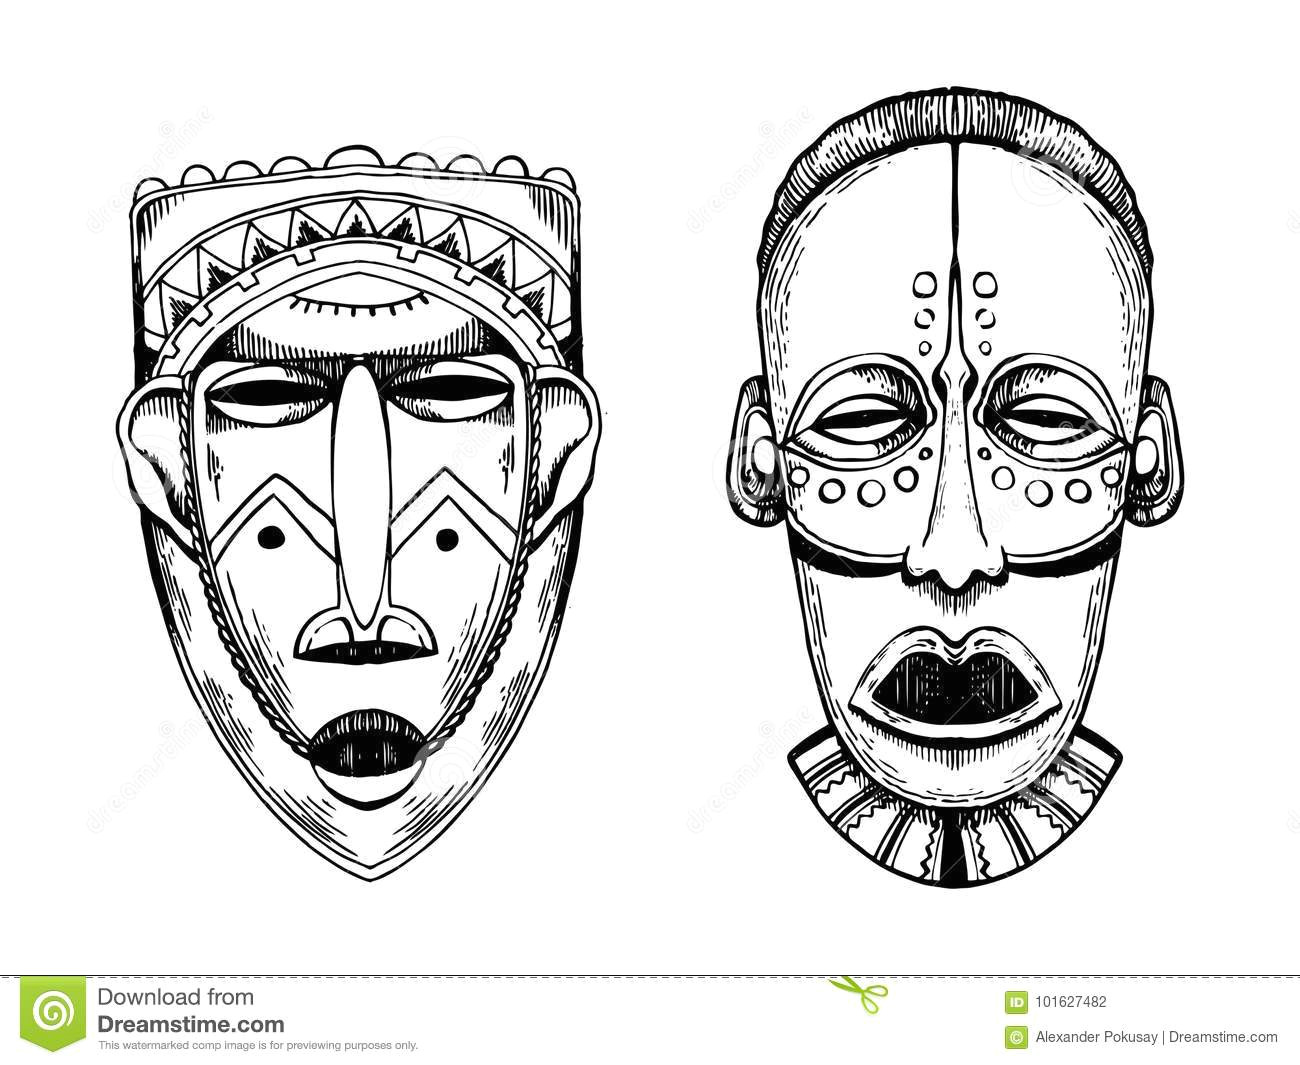 african masks of savages engraving style vector